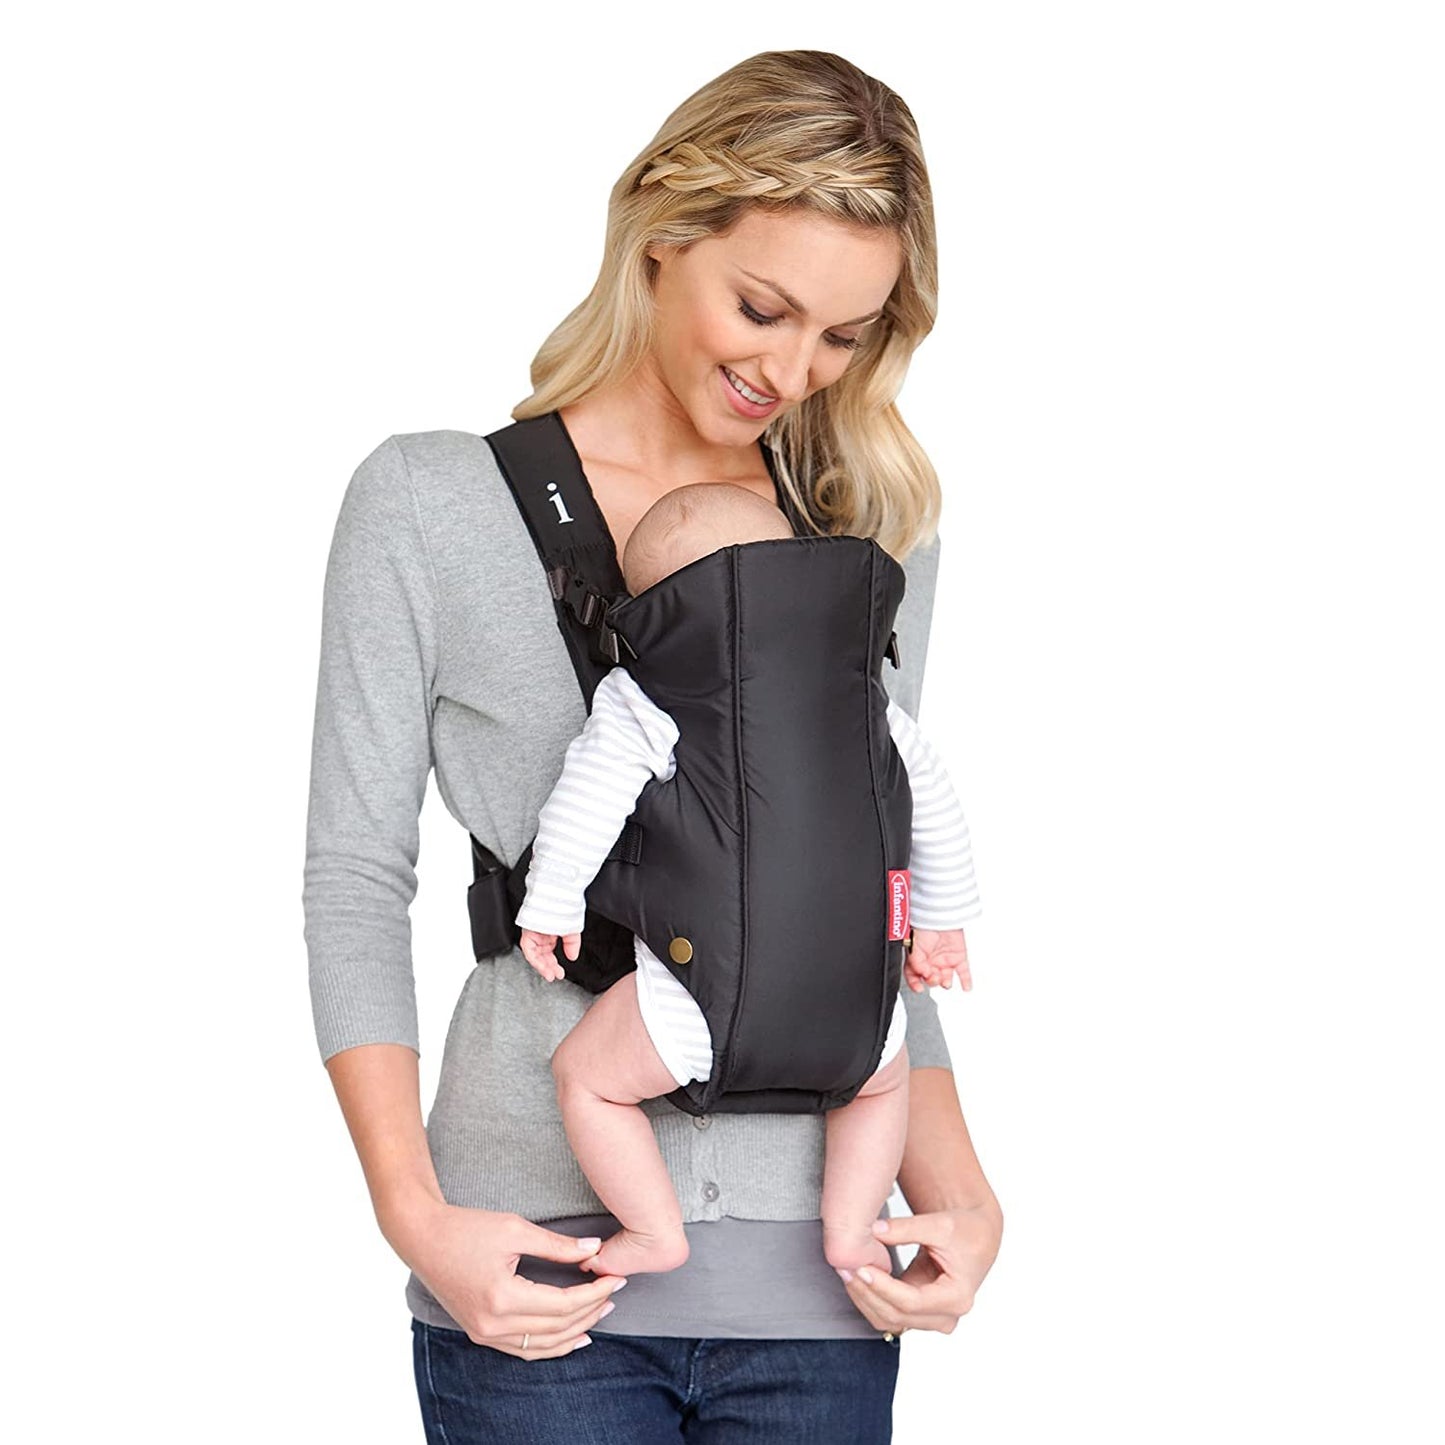 Infantino Swift Classic Carrier, Black